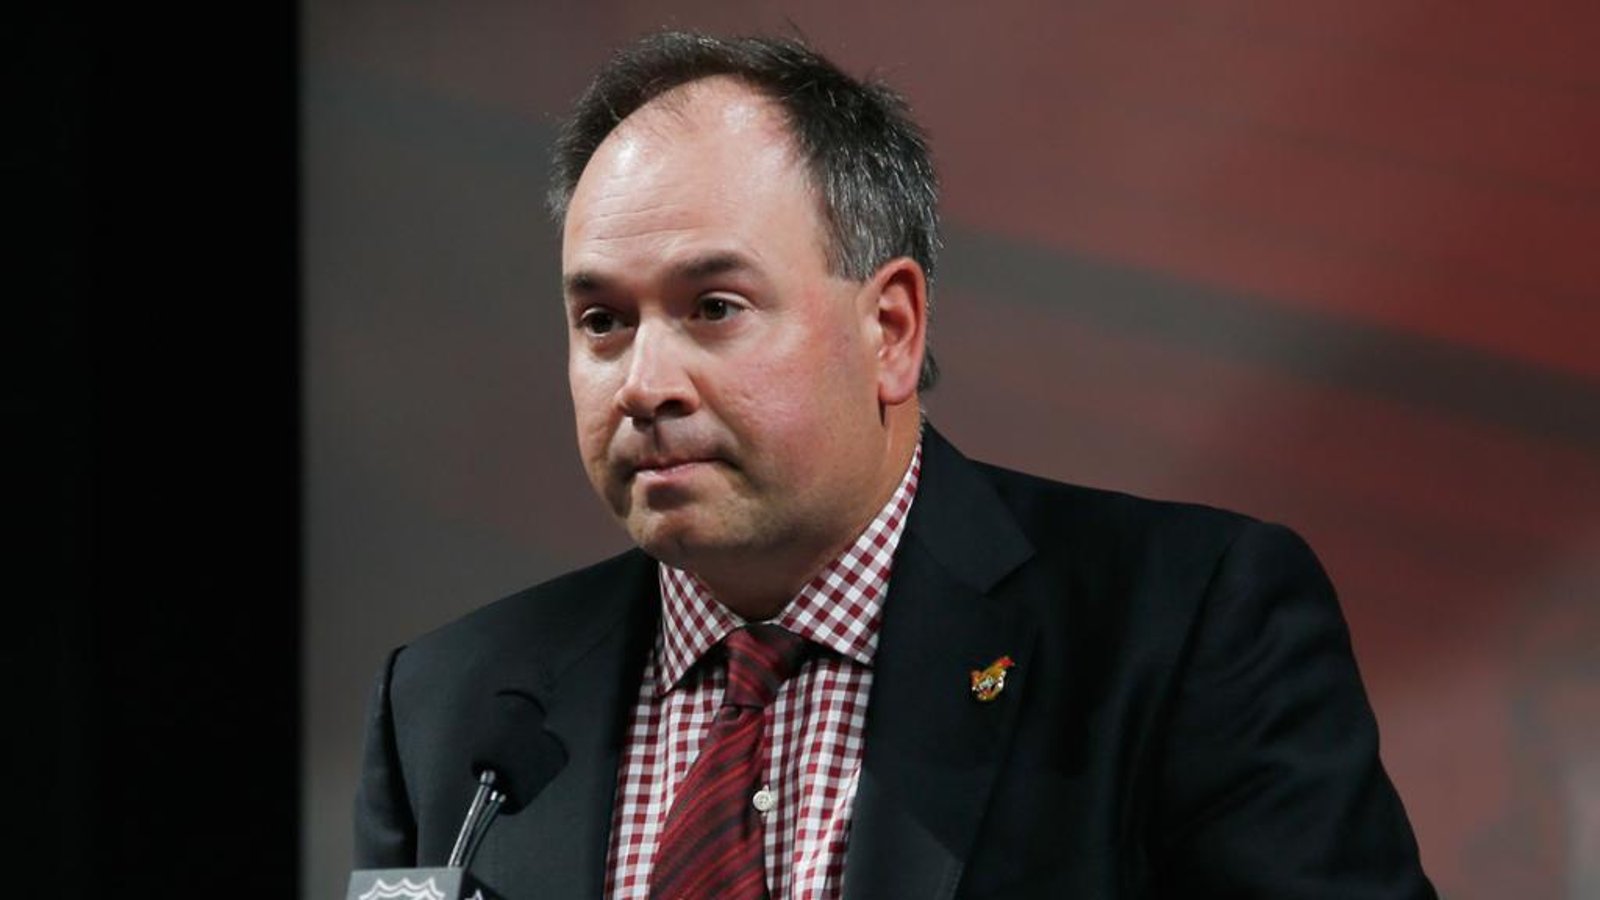 Pierre Dorion steals the show in media conference!